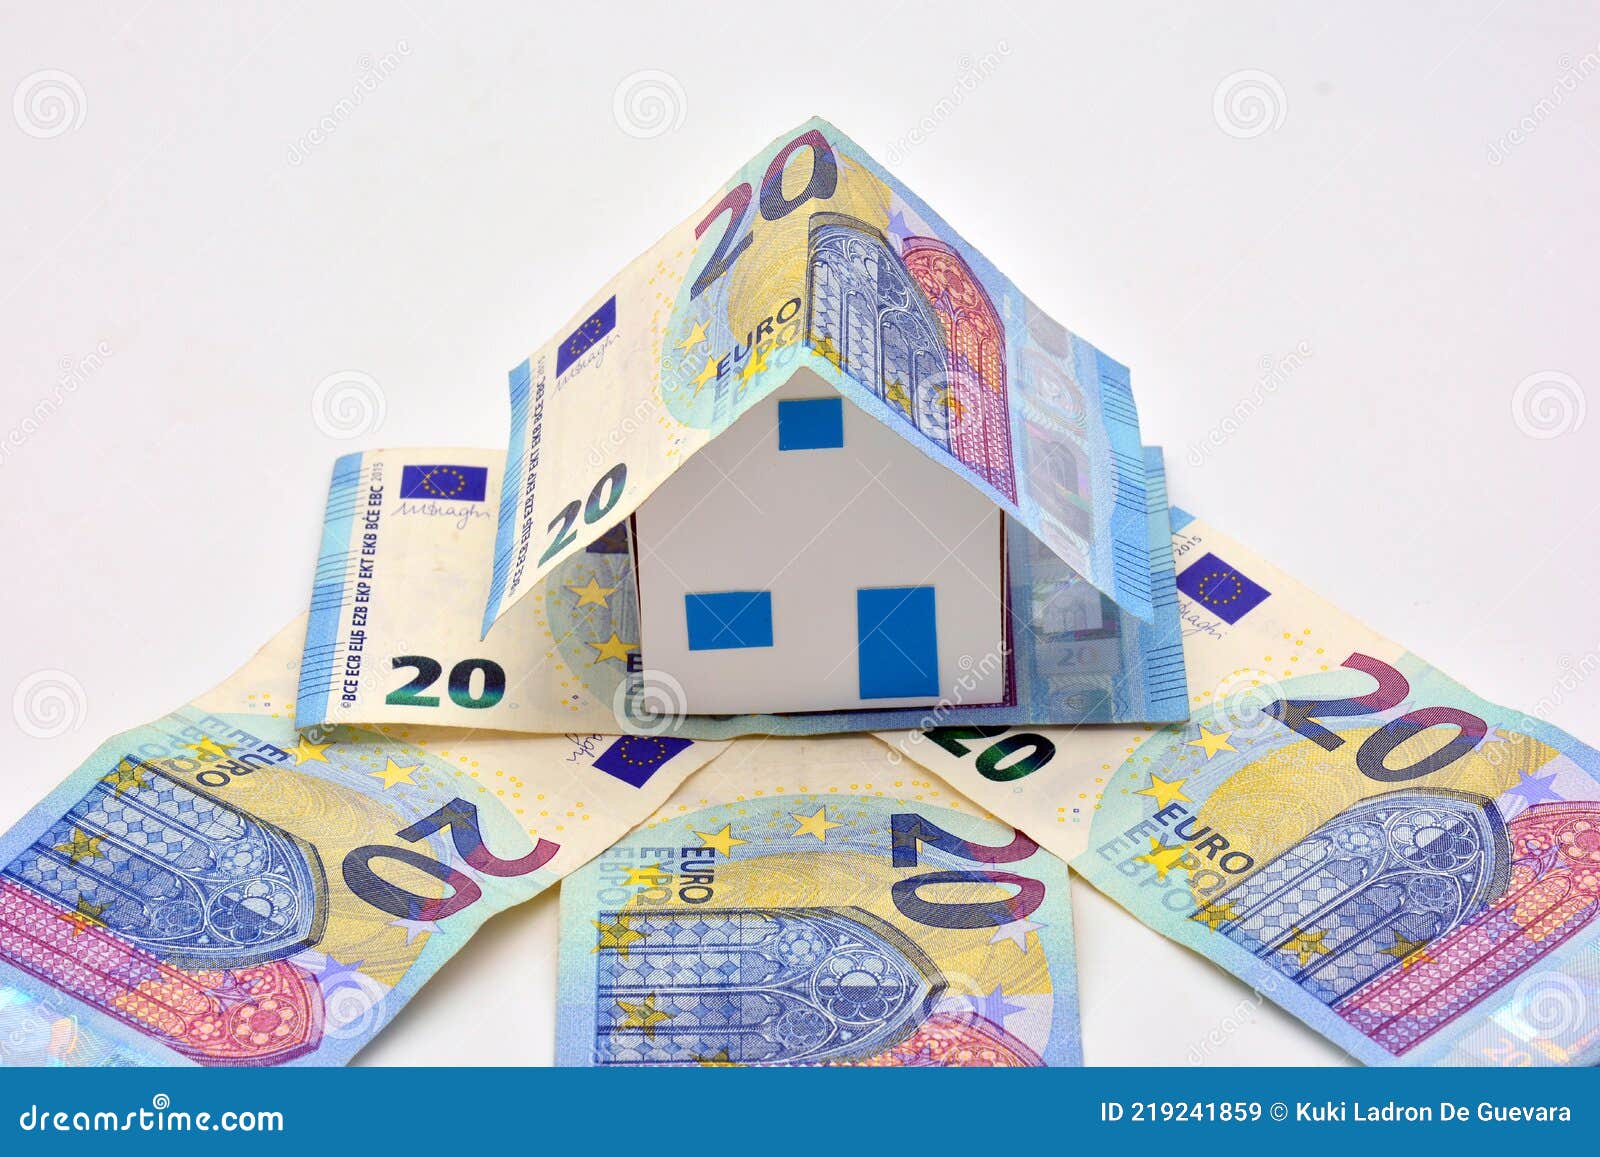 house made with euro bills